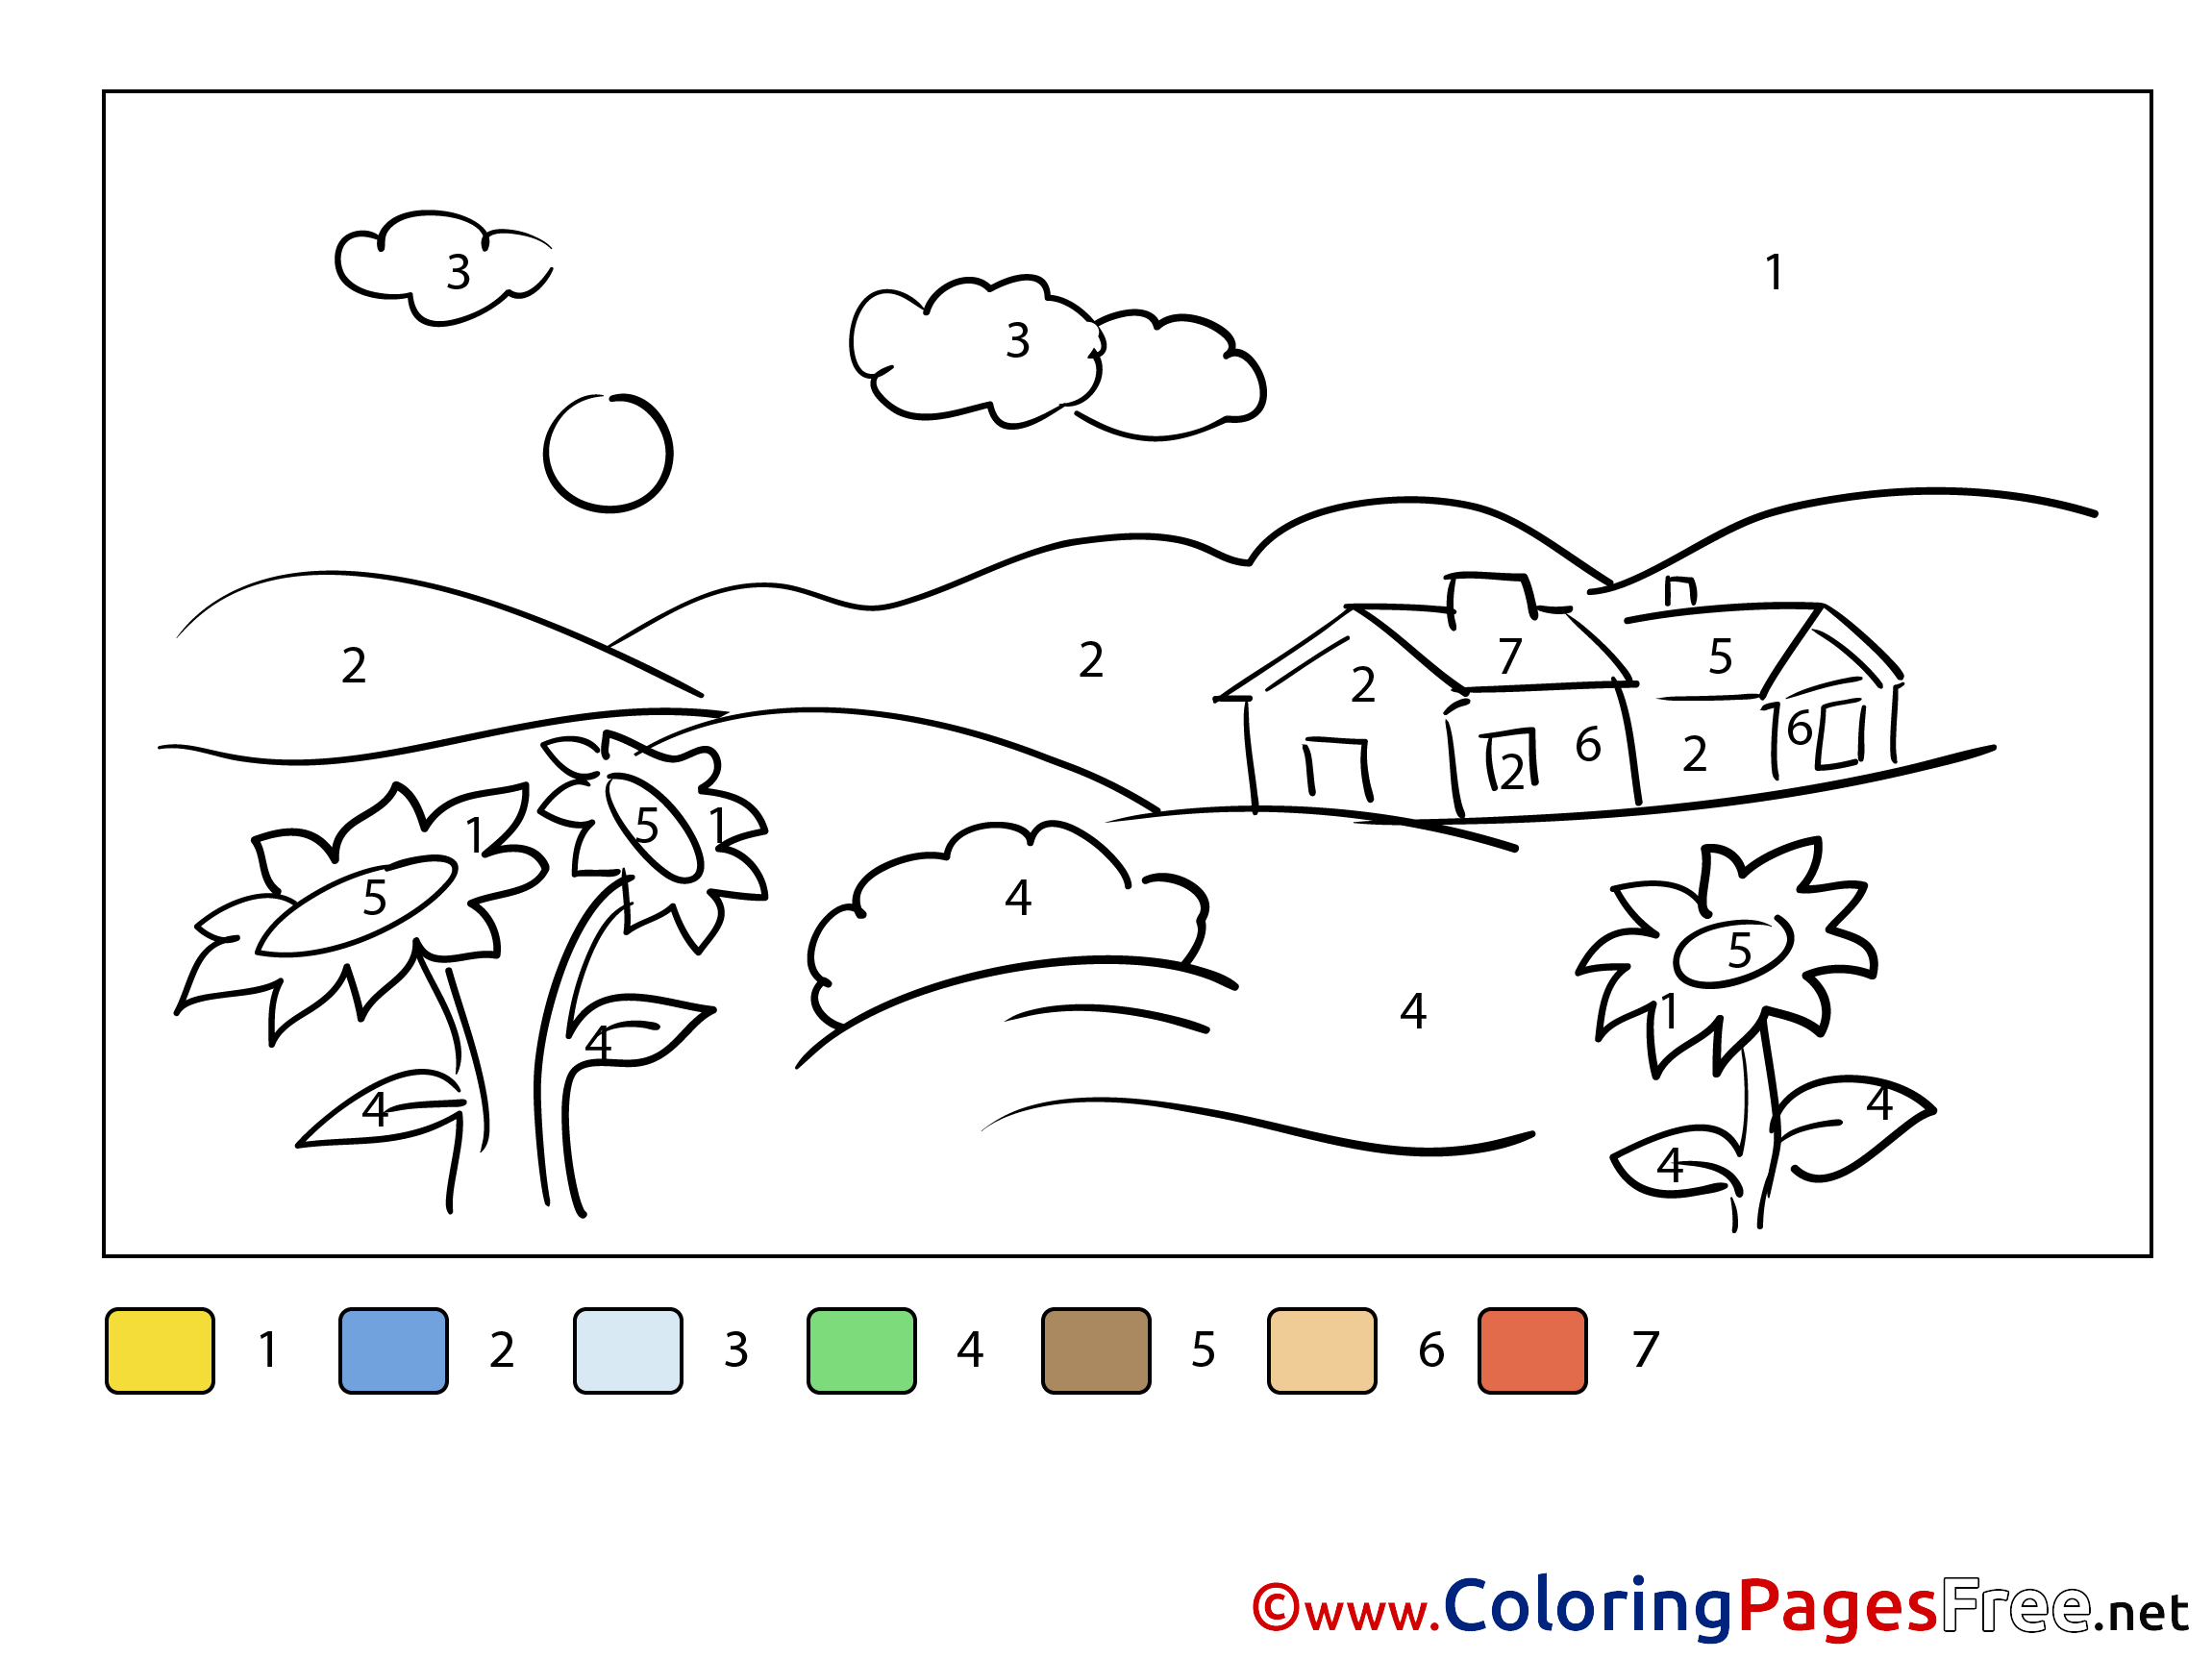 village-for-kids-painting-by-number-colouring-page